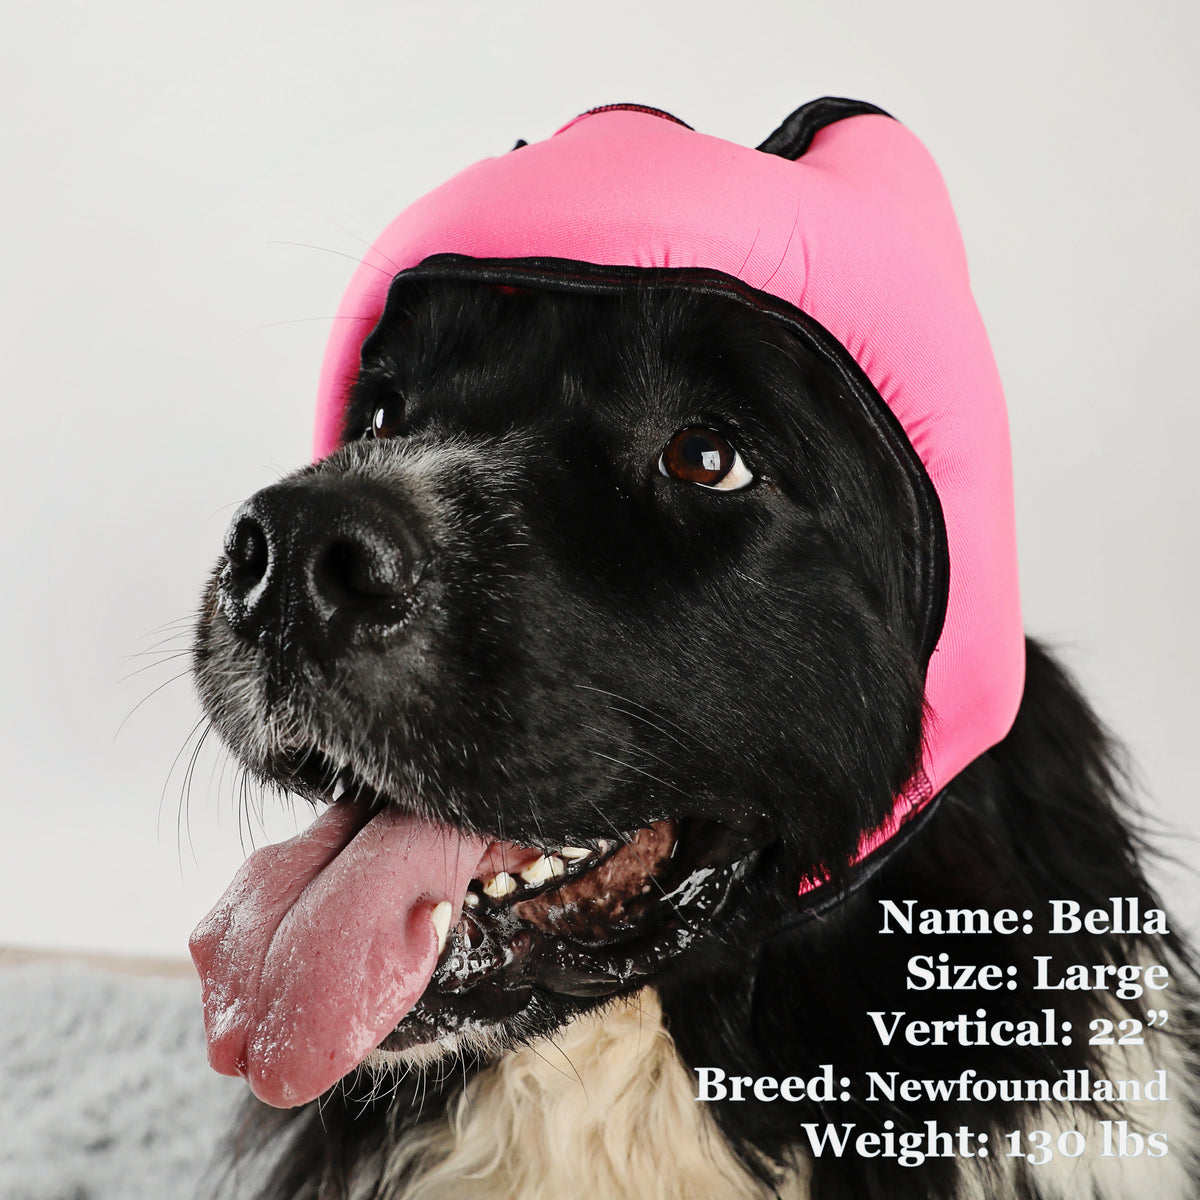 Bella is a Newfoundland in a Large Pink PAWNIX Noise Cancelling Headset for dogs